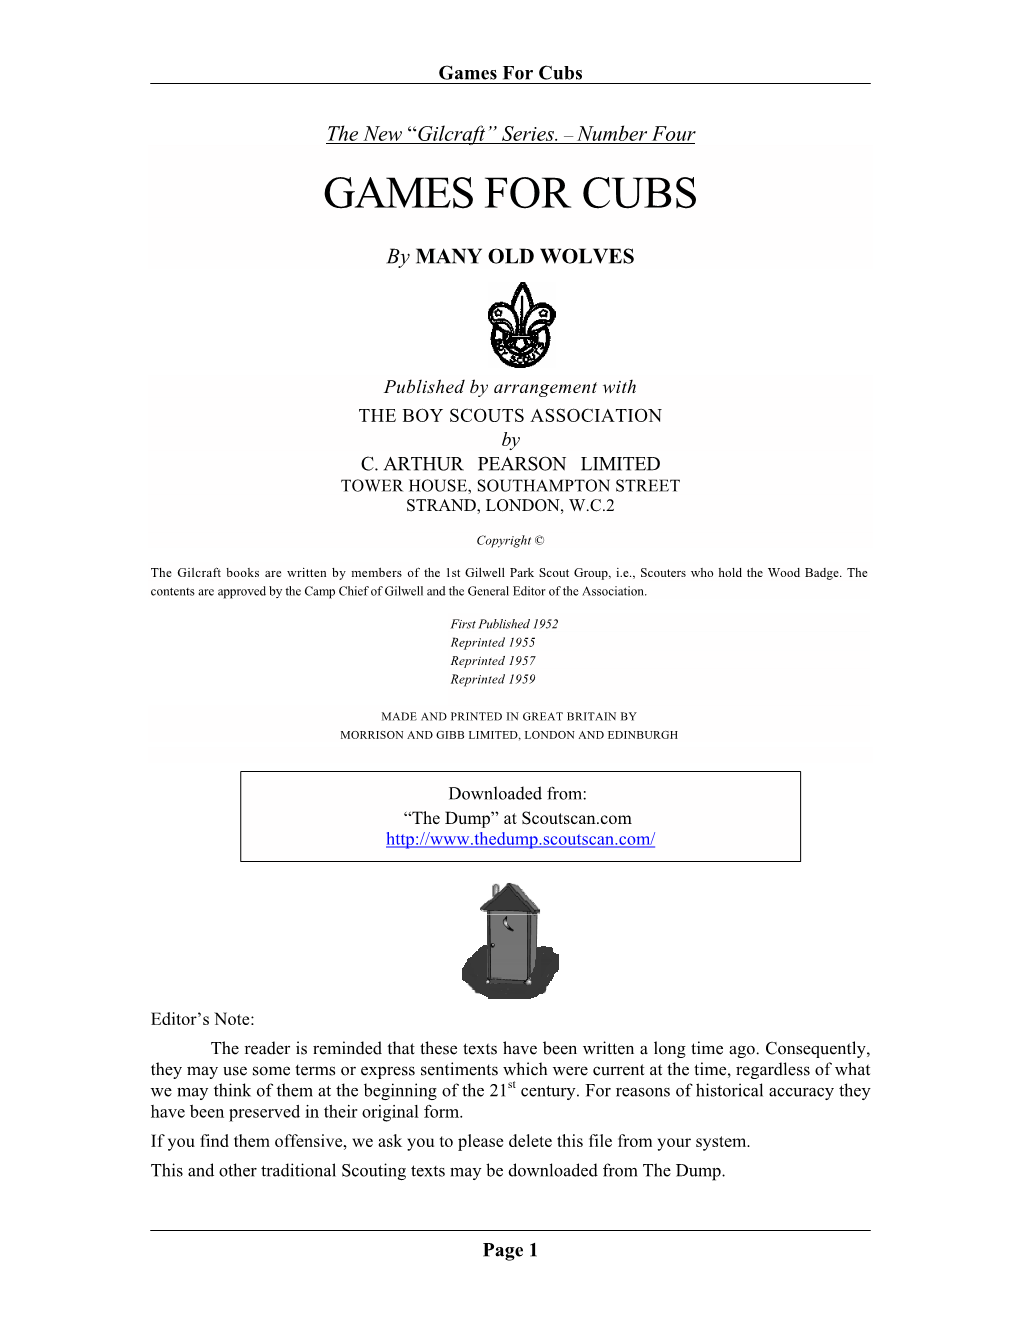 Games for Cubs